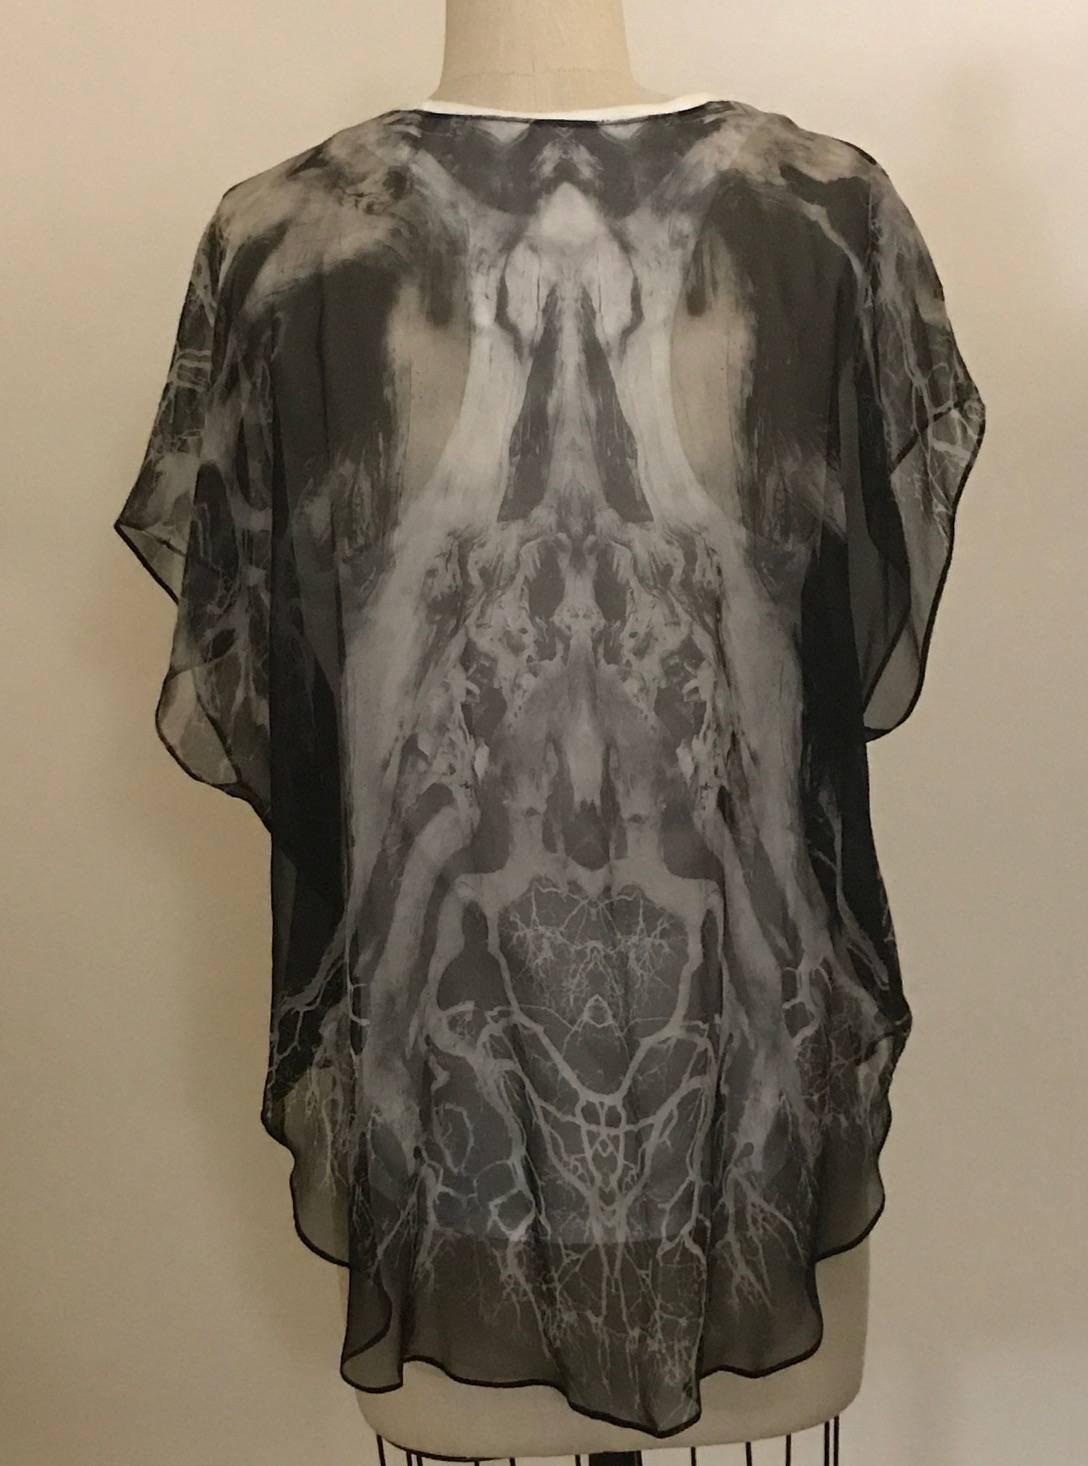 Alexander McQueen 2010 white racerback tank with attached sheer grey silk overlay featuring a print that seems to be a hybrid of lightning and roots.

Outer: 100% silk.
Inner: 100% cotton.

Made in Italy.

Size IT 42, approximate US 6.